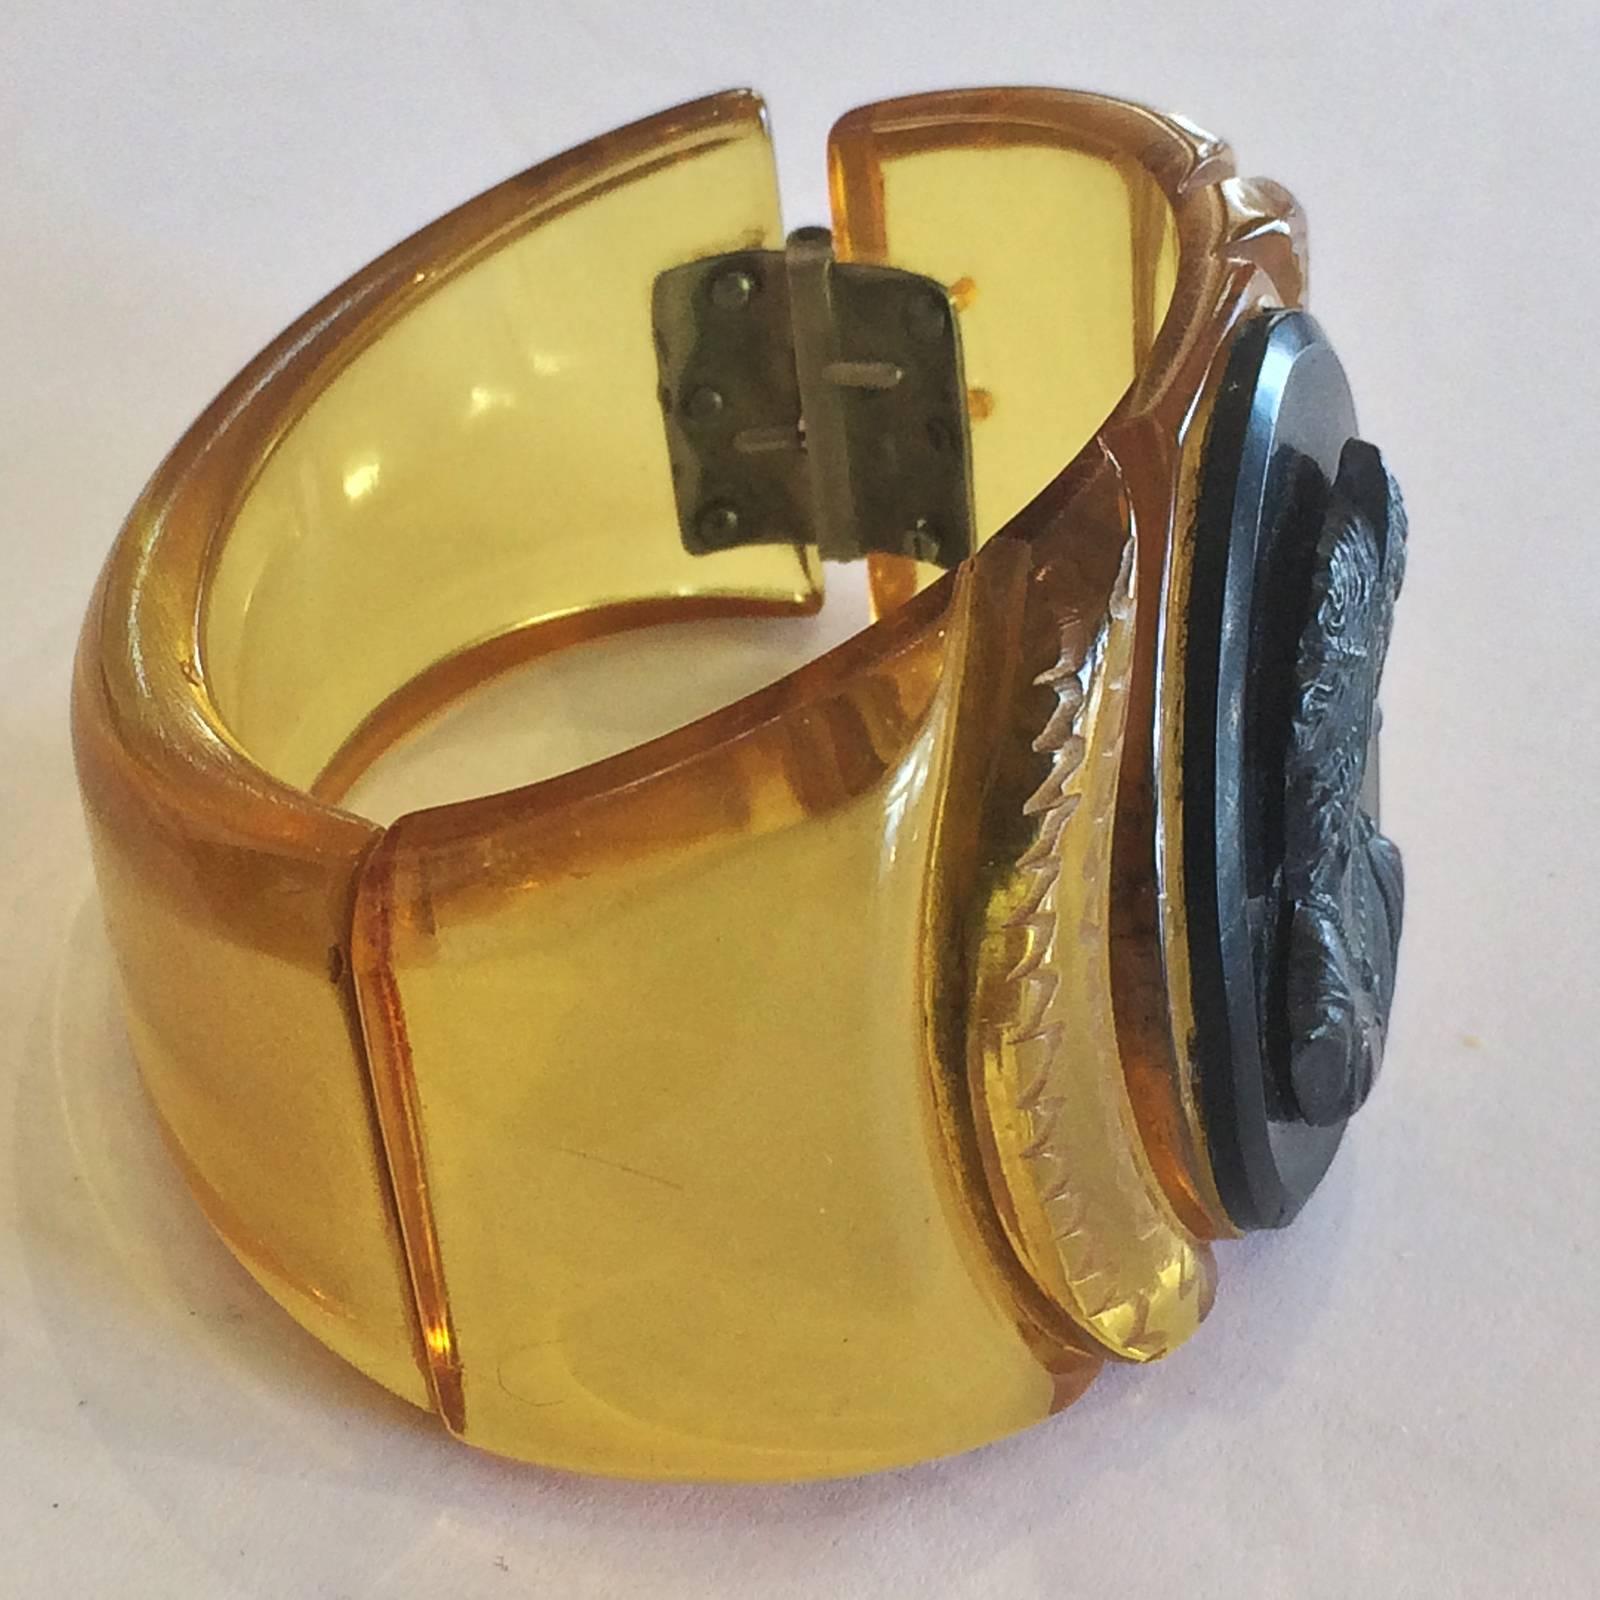 Art Deco Clamper Bangle in carved Apple juice Bakelite, set with a lozenge of black Bakelite, with a carved  Bakelite Cameo. No damage, losses or repairs. The original spring hinge works perfectly with no distortion. An excellent example of serious